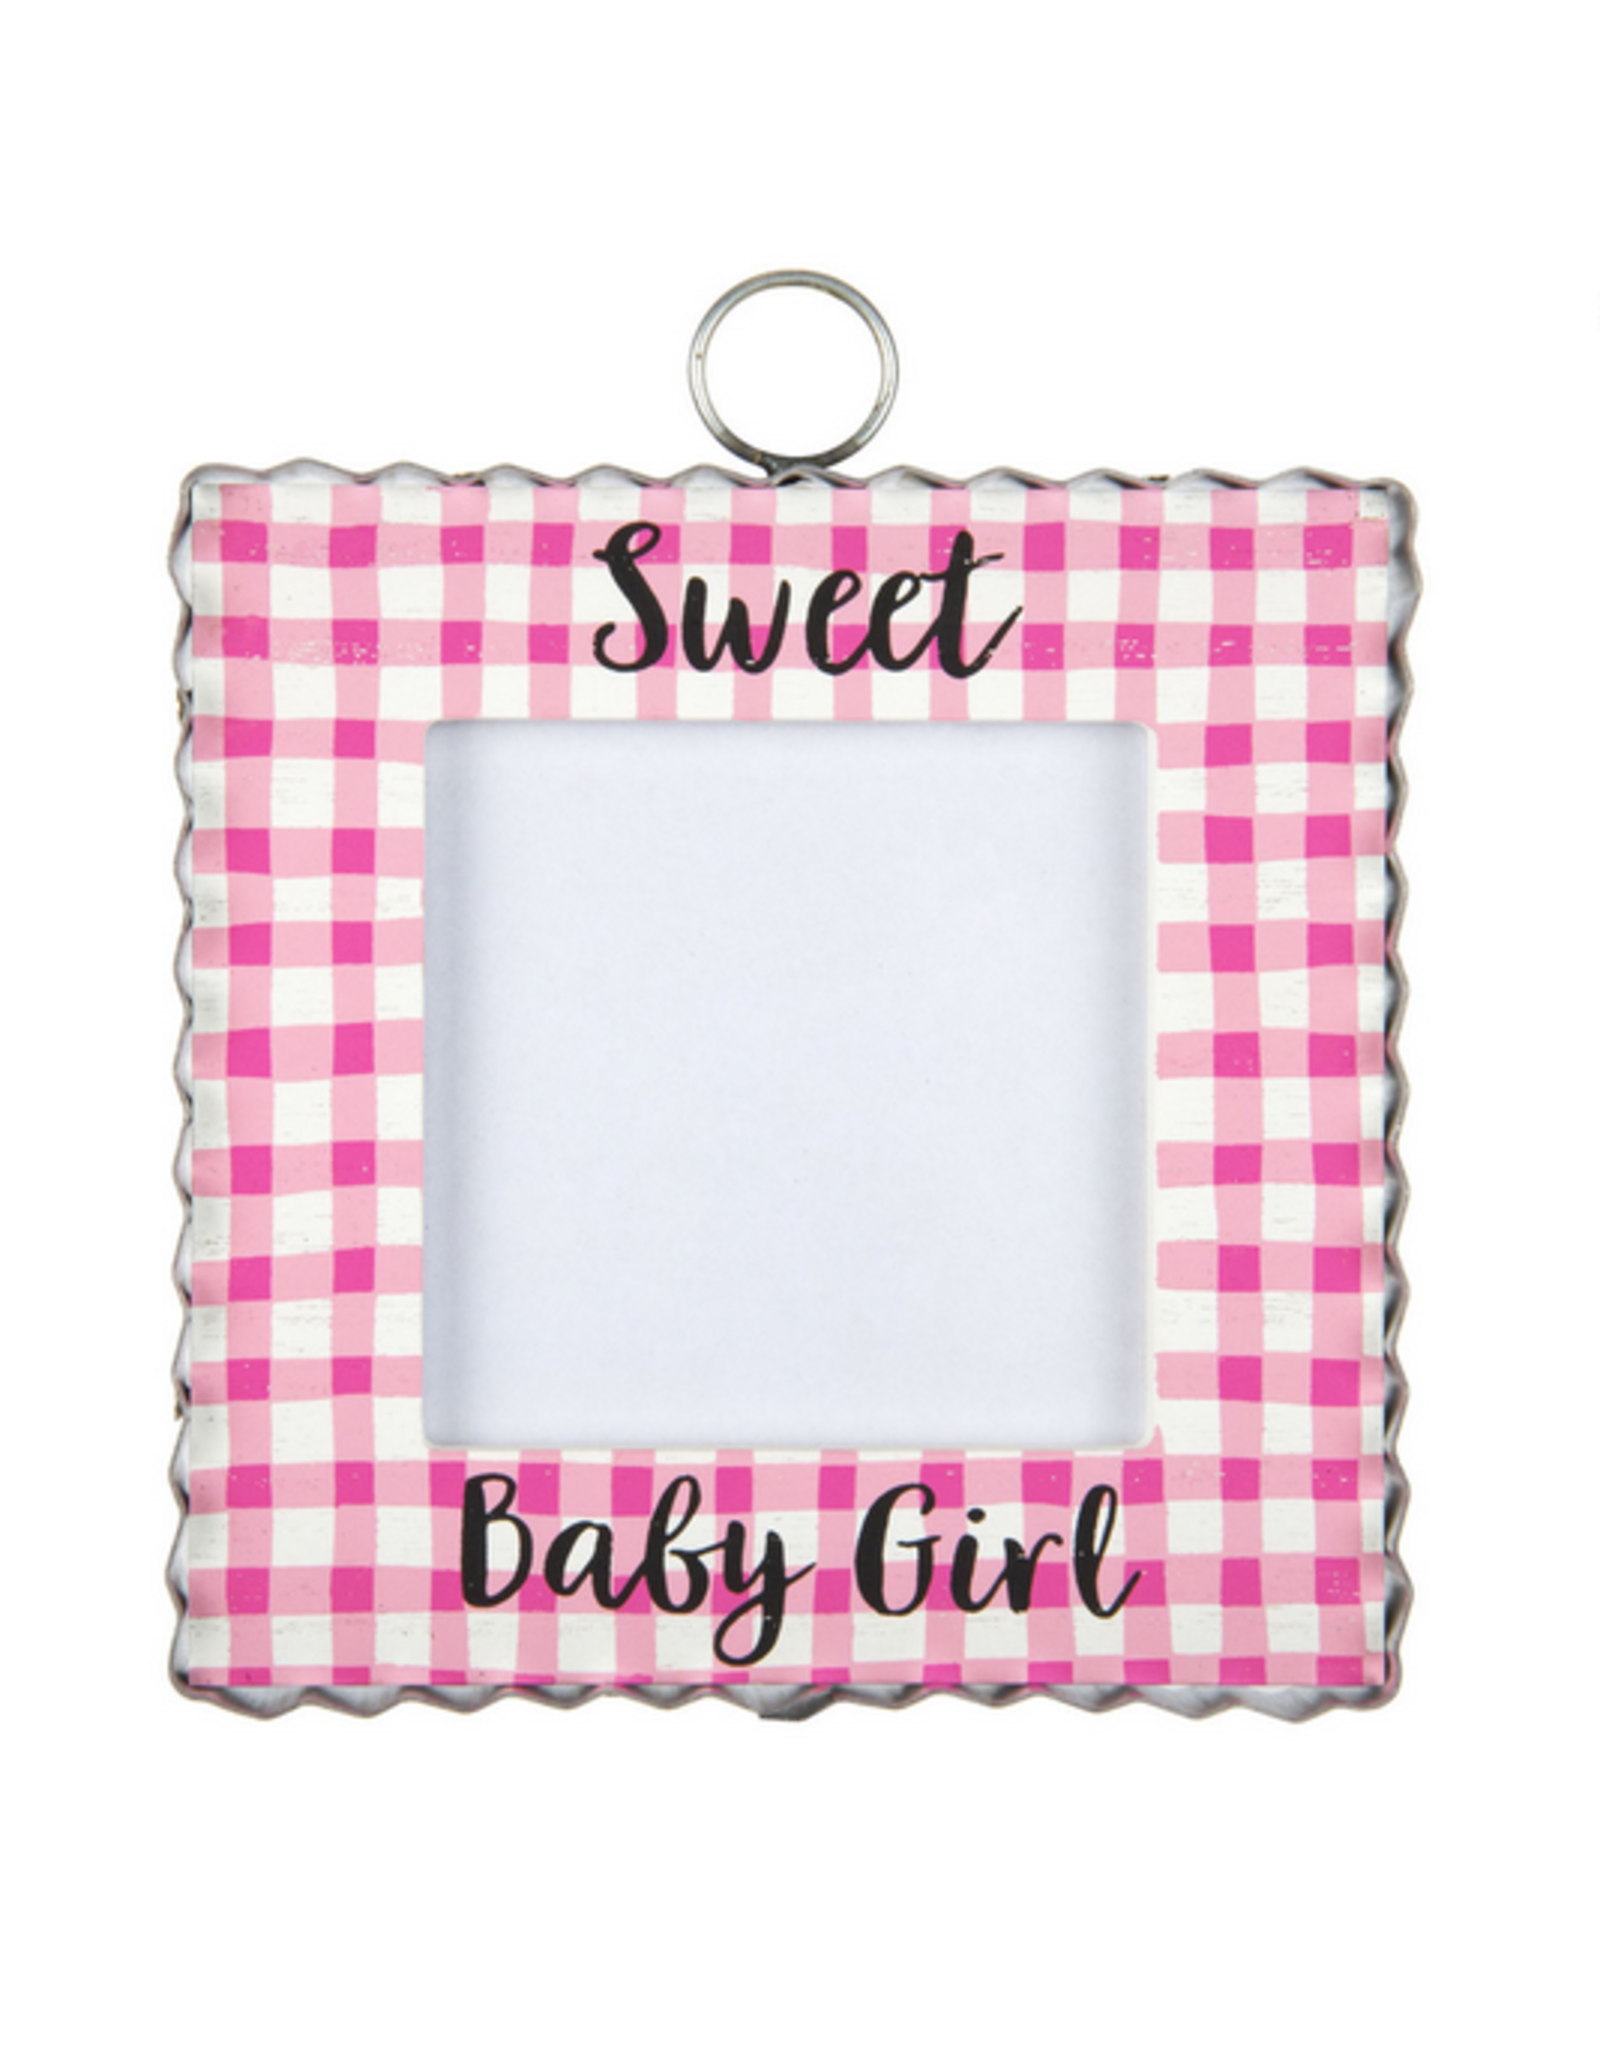 RTC Gallery Baby Photo Frame Pink